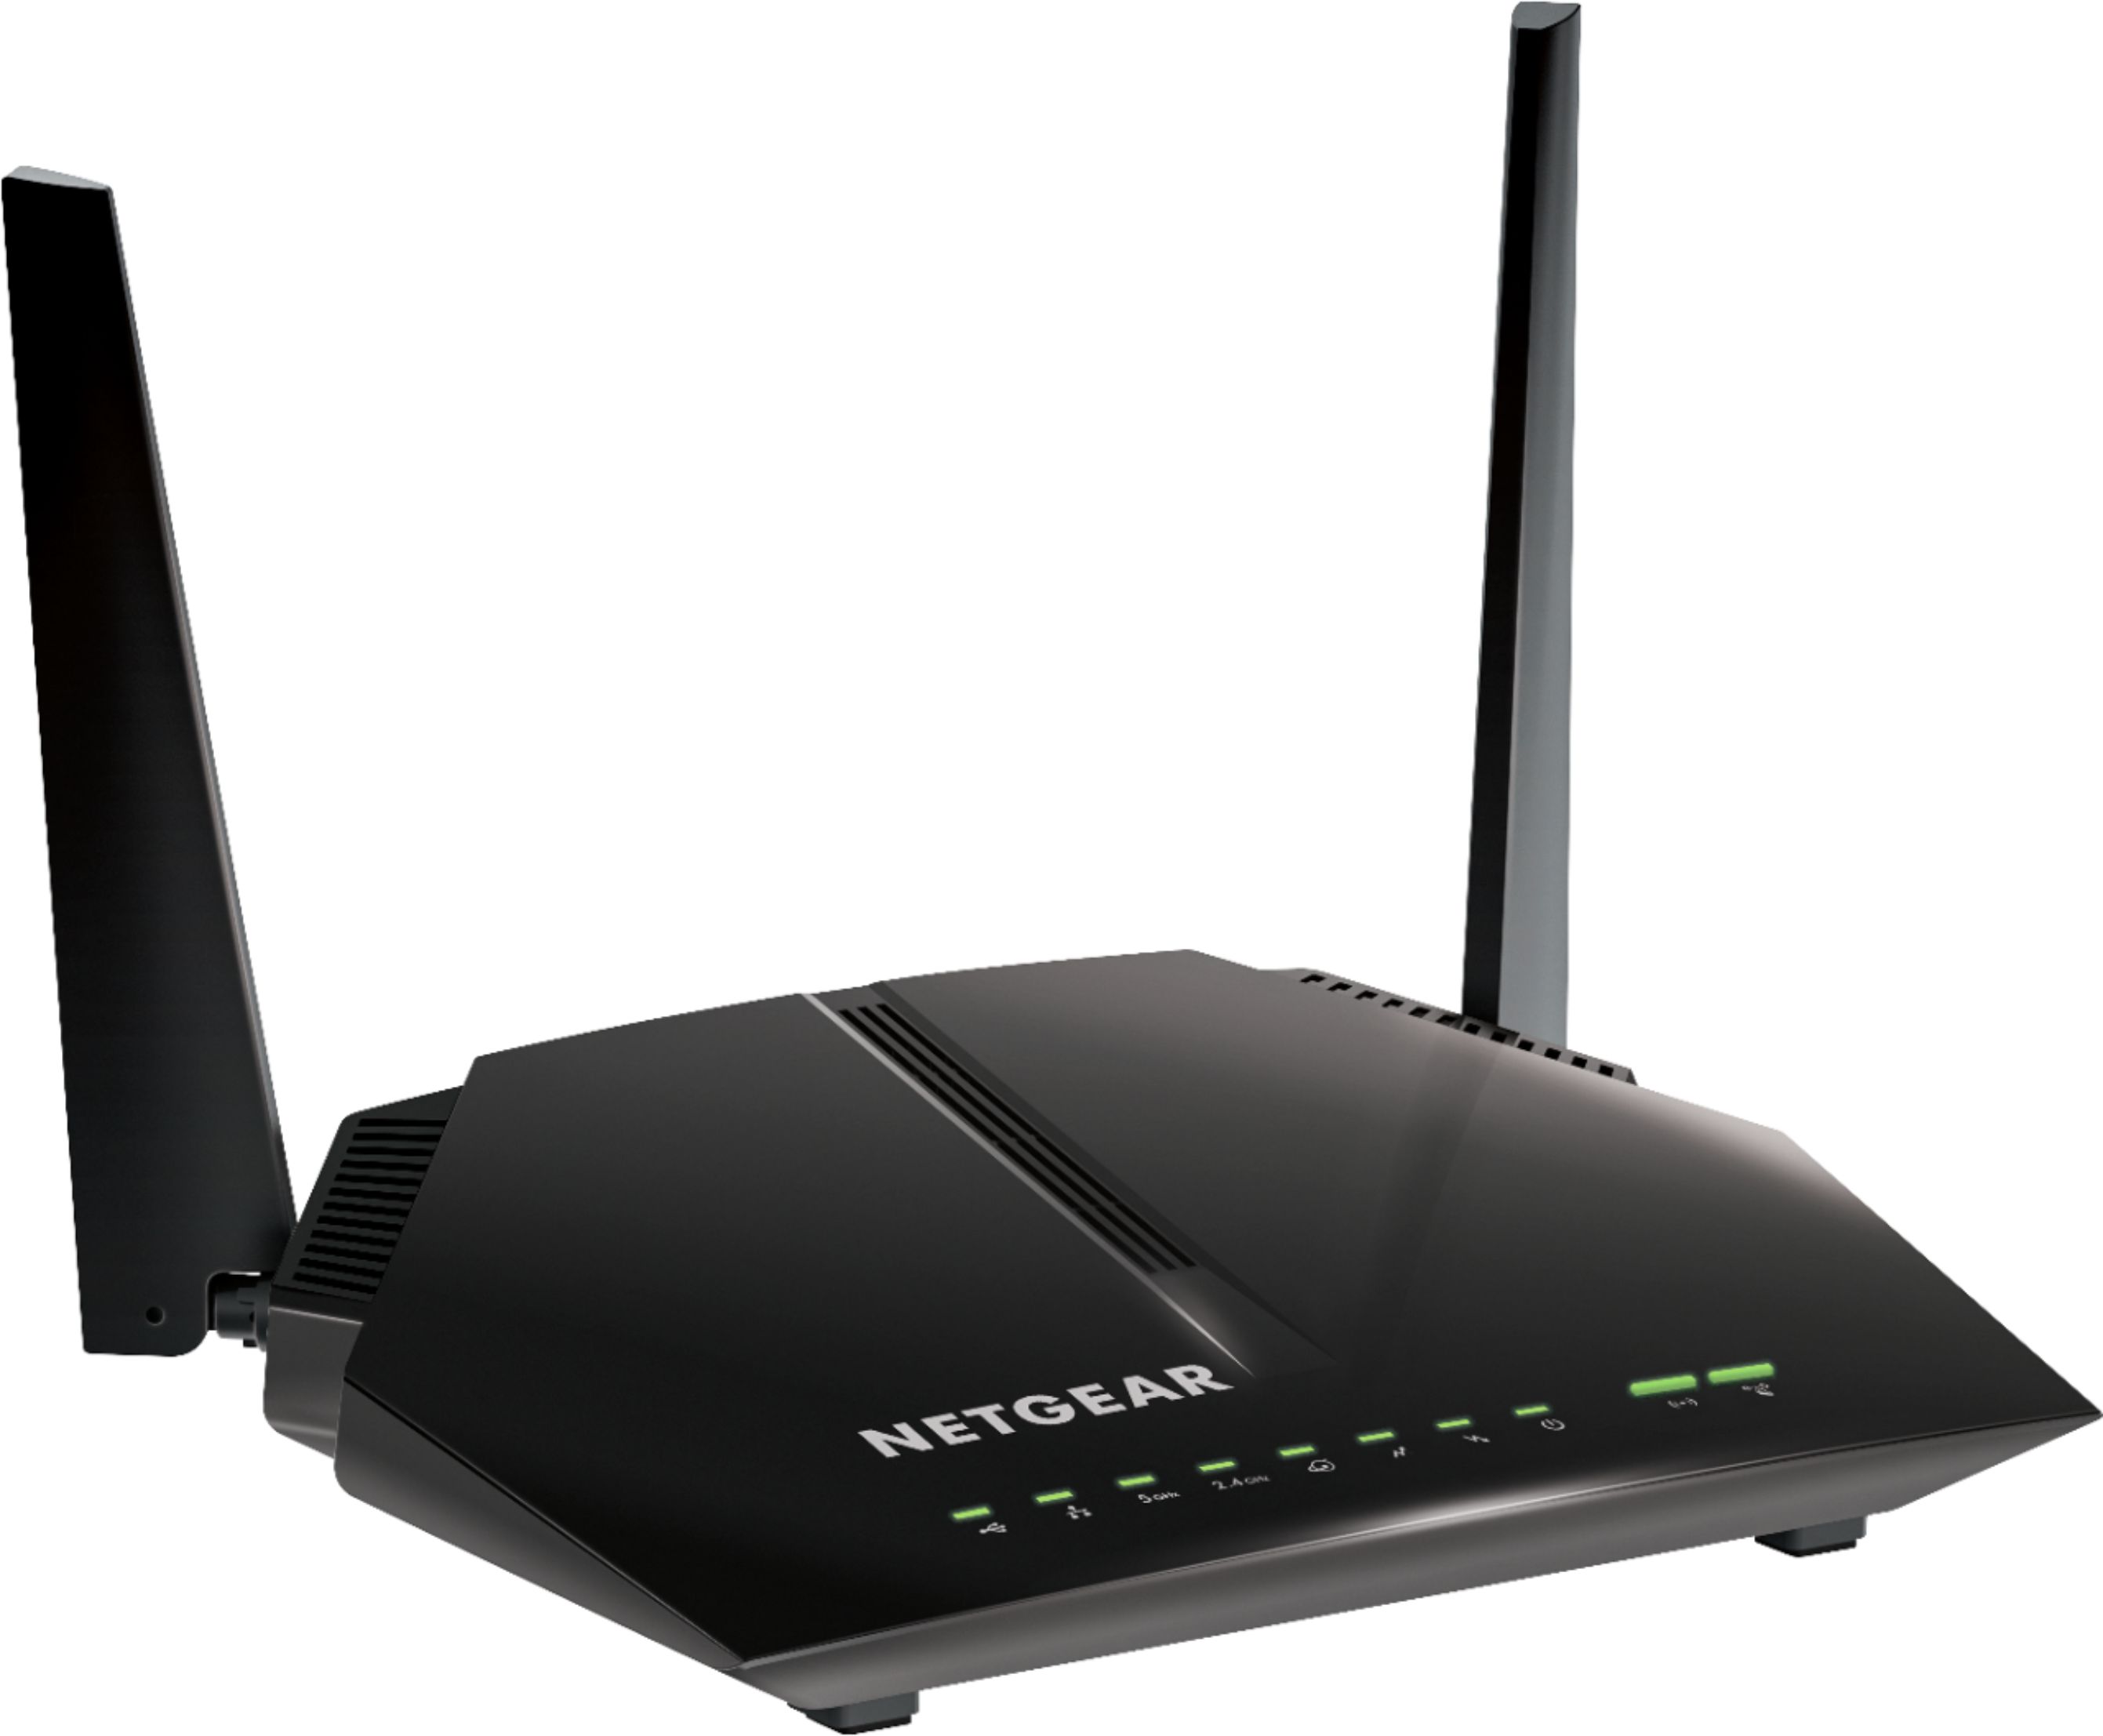 Angle View: NETGEAR - Dual-Band AC1200 Router with 8 x 4 DOCSIS 3.0 Cable Modem - Black